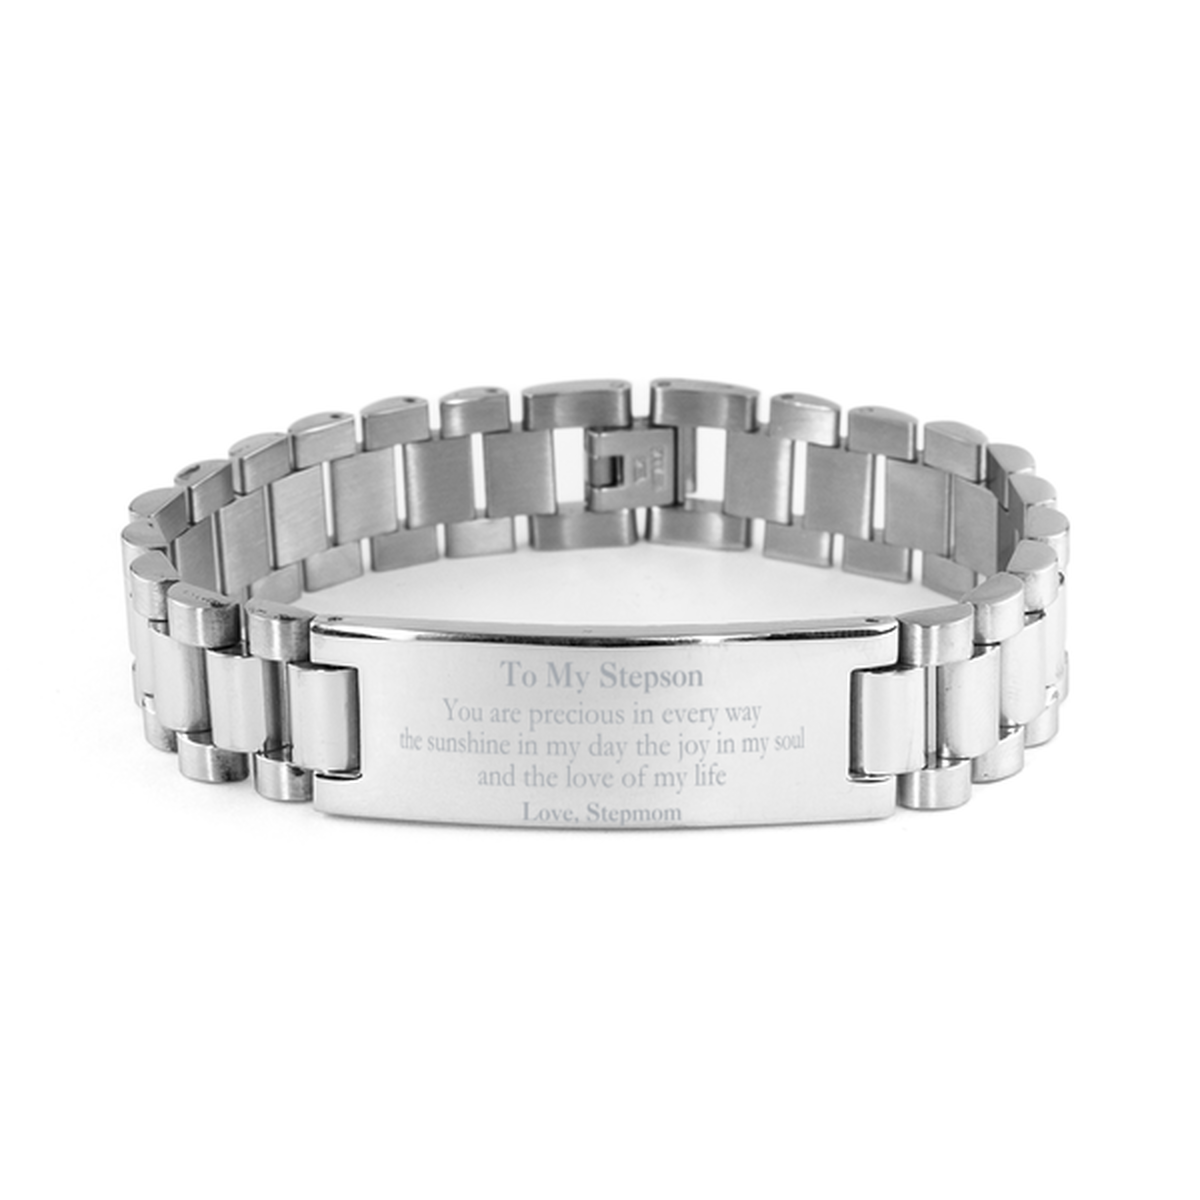 Graduation Gifts for Stepson Ladder Stainless Steel Bracelet Present from Stepmom, Christmas Stepson Birthday Gifts Stepson You are precious in every way the sunshine in my day. Love, Stepmom